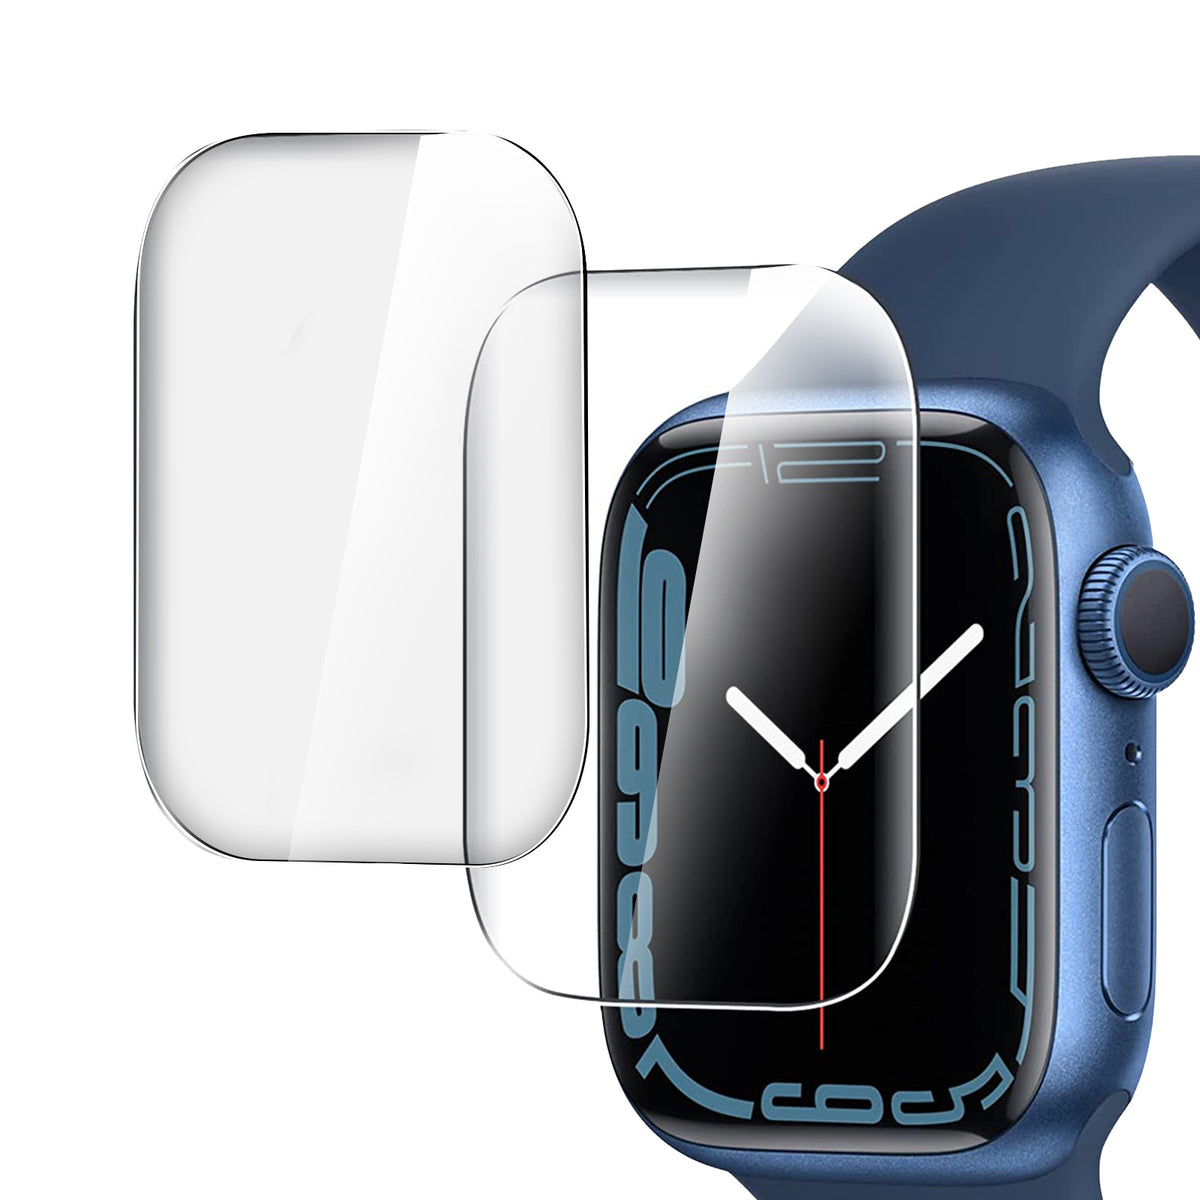 Hydrogel Film for Apple Watch -2 Pack